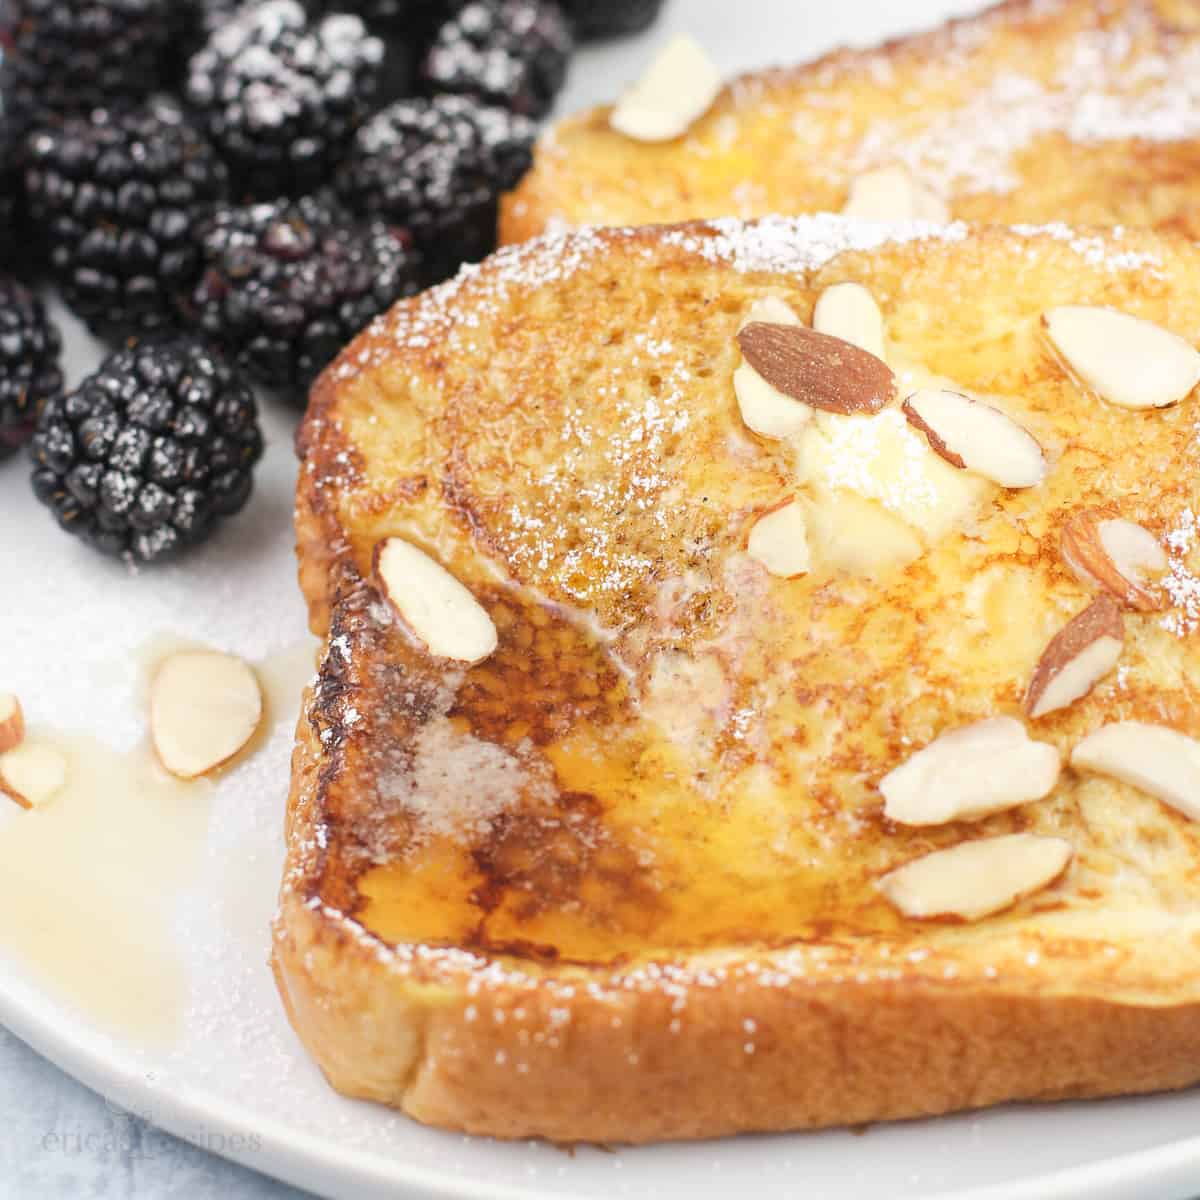 Blackstone French toast with amaretto on white plate with blackberries